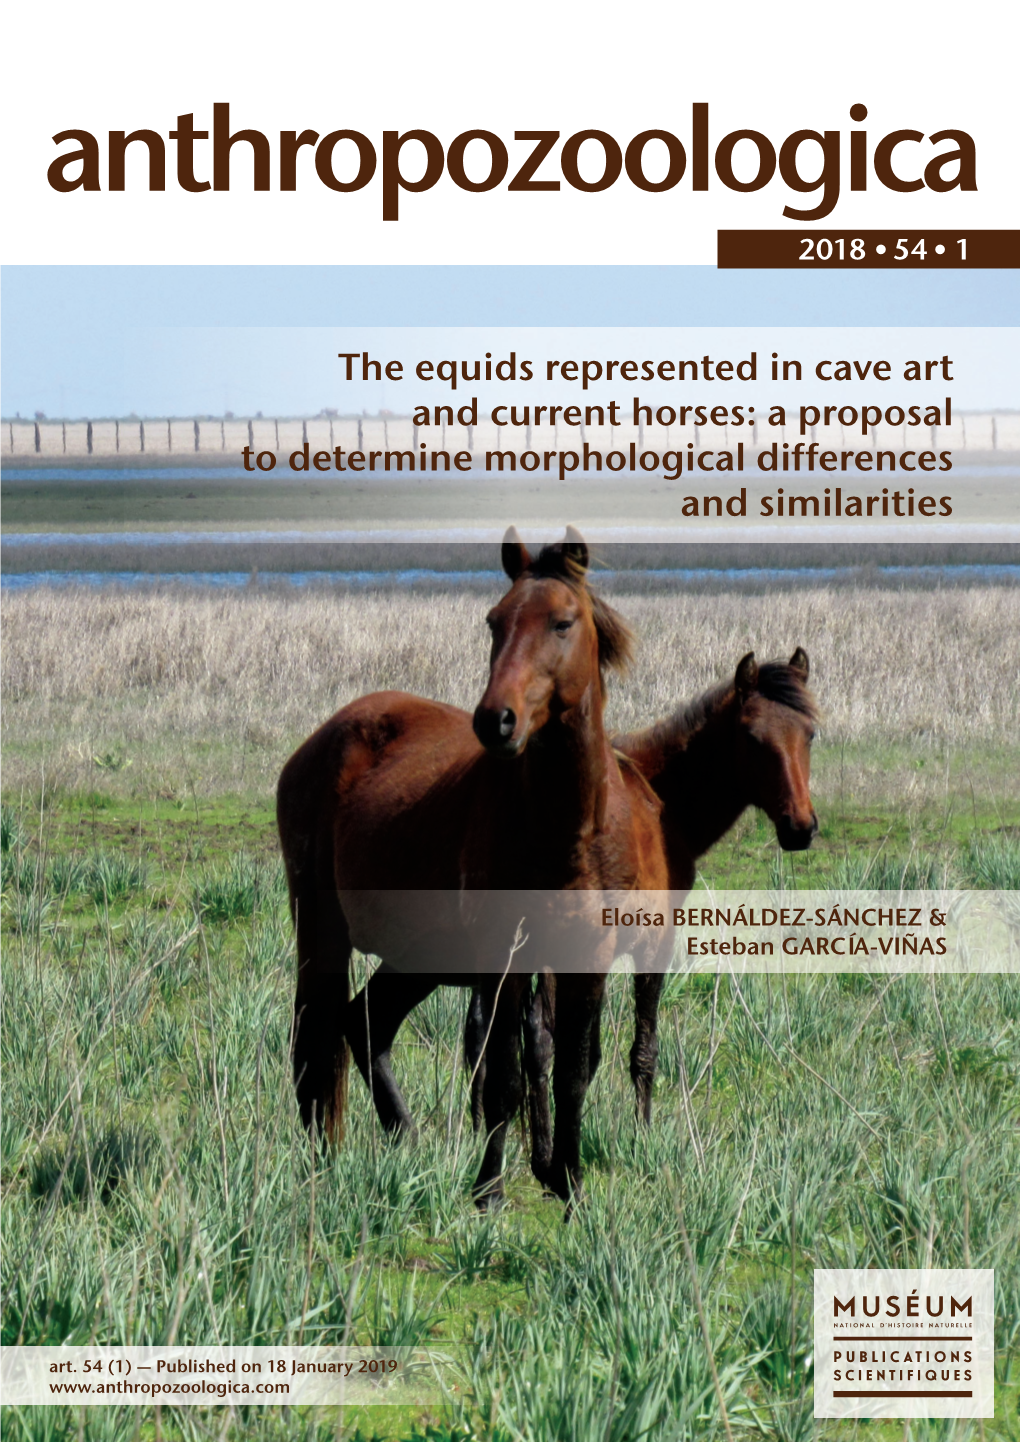 The Equids Represented in Cave Art and Current Horses: a Proposal to Determine Morphological Differences and Similarities